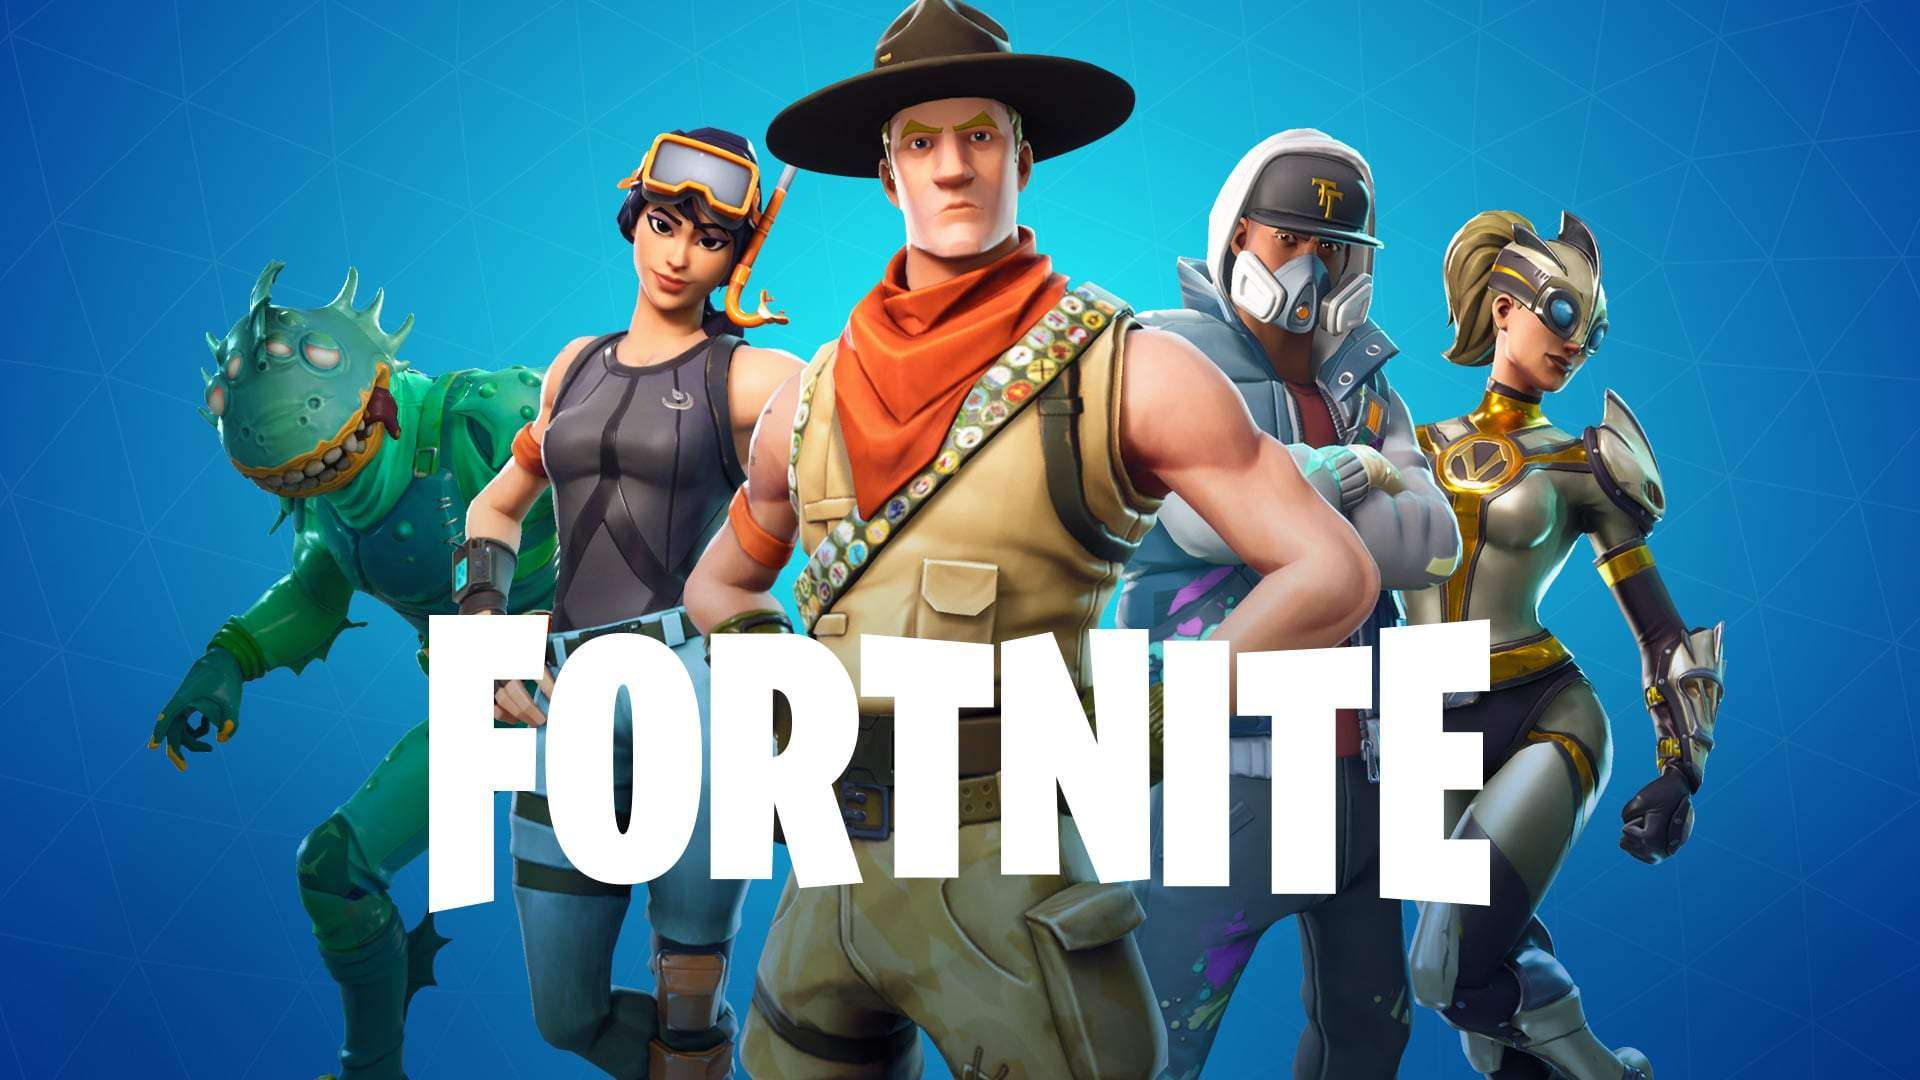 Fortnite Installer Apk: How to Install on Your Android Smartphone?